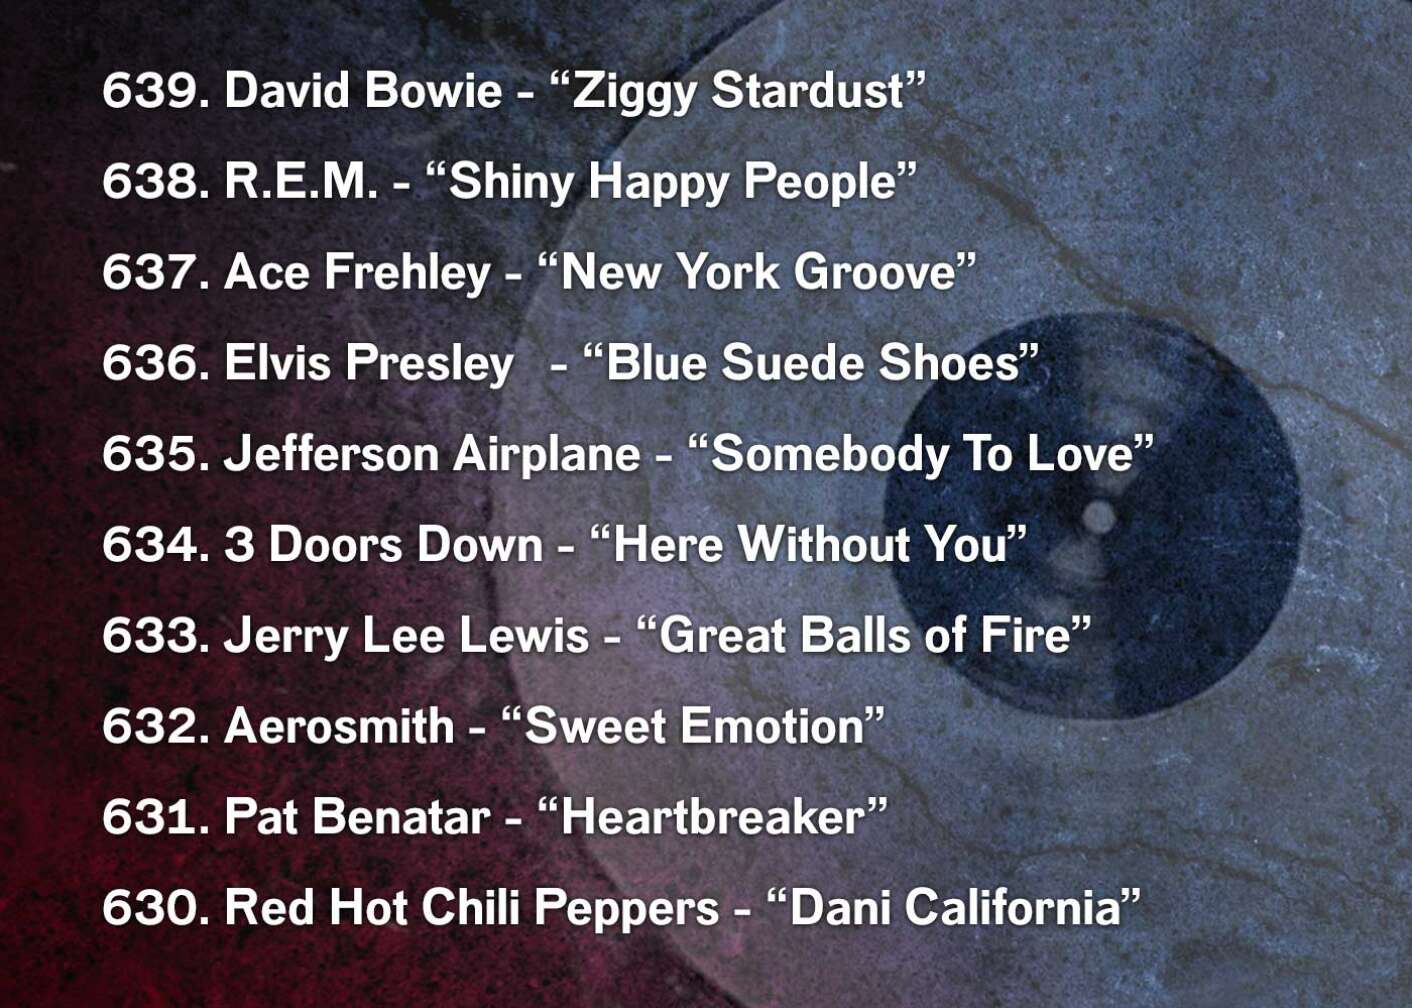 639. David Bowie - “Ziggy Stardust” 638. R.E.M. - “Shiny Happy People” 637. Ace Frehley - “New York Groove” 636. Elvis Presley	 - “Blue Suede Shoes” 635. Jefferson Airplane - “Somebody To Love” 634. 3 Doors Down - “Here Without You” 633. Jerry Lee Lewis - “Great Balls of Fire” 632. Aerosmith - “Sweet Emotion” 631. Pat Benatar - “Heartbreaker” 630. Red Hot Chili Peppers - “Dani California”